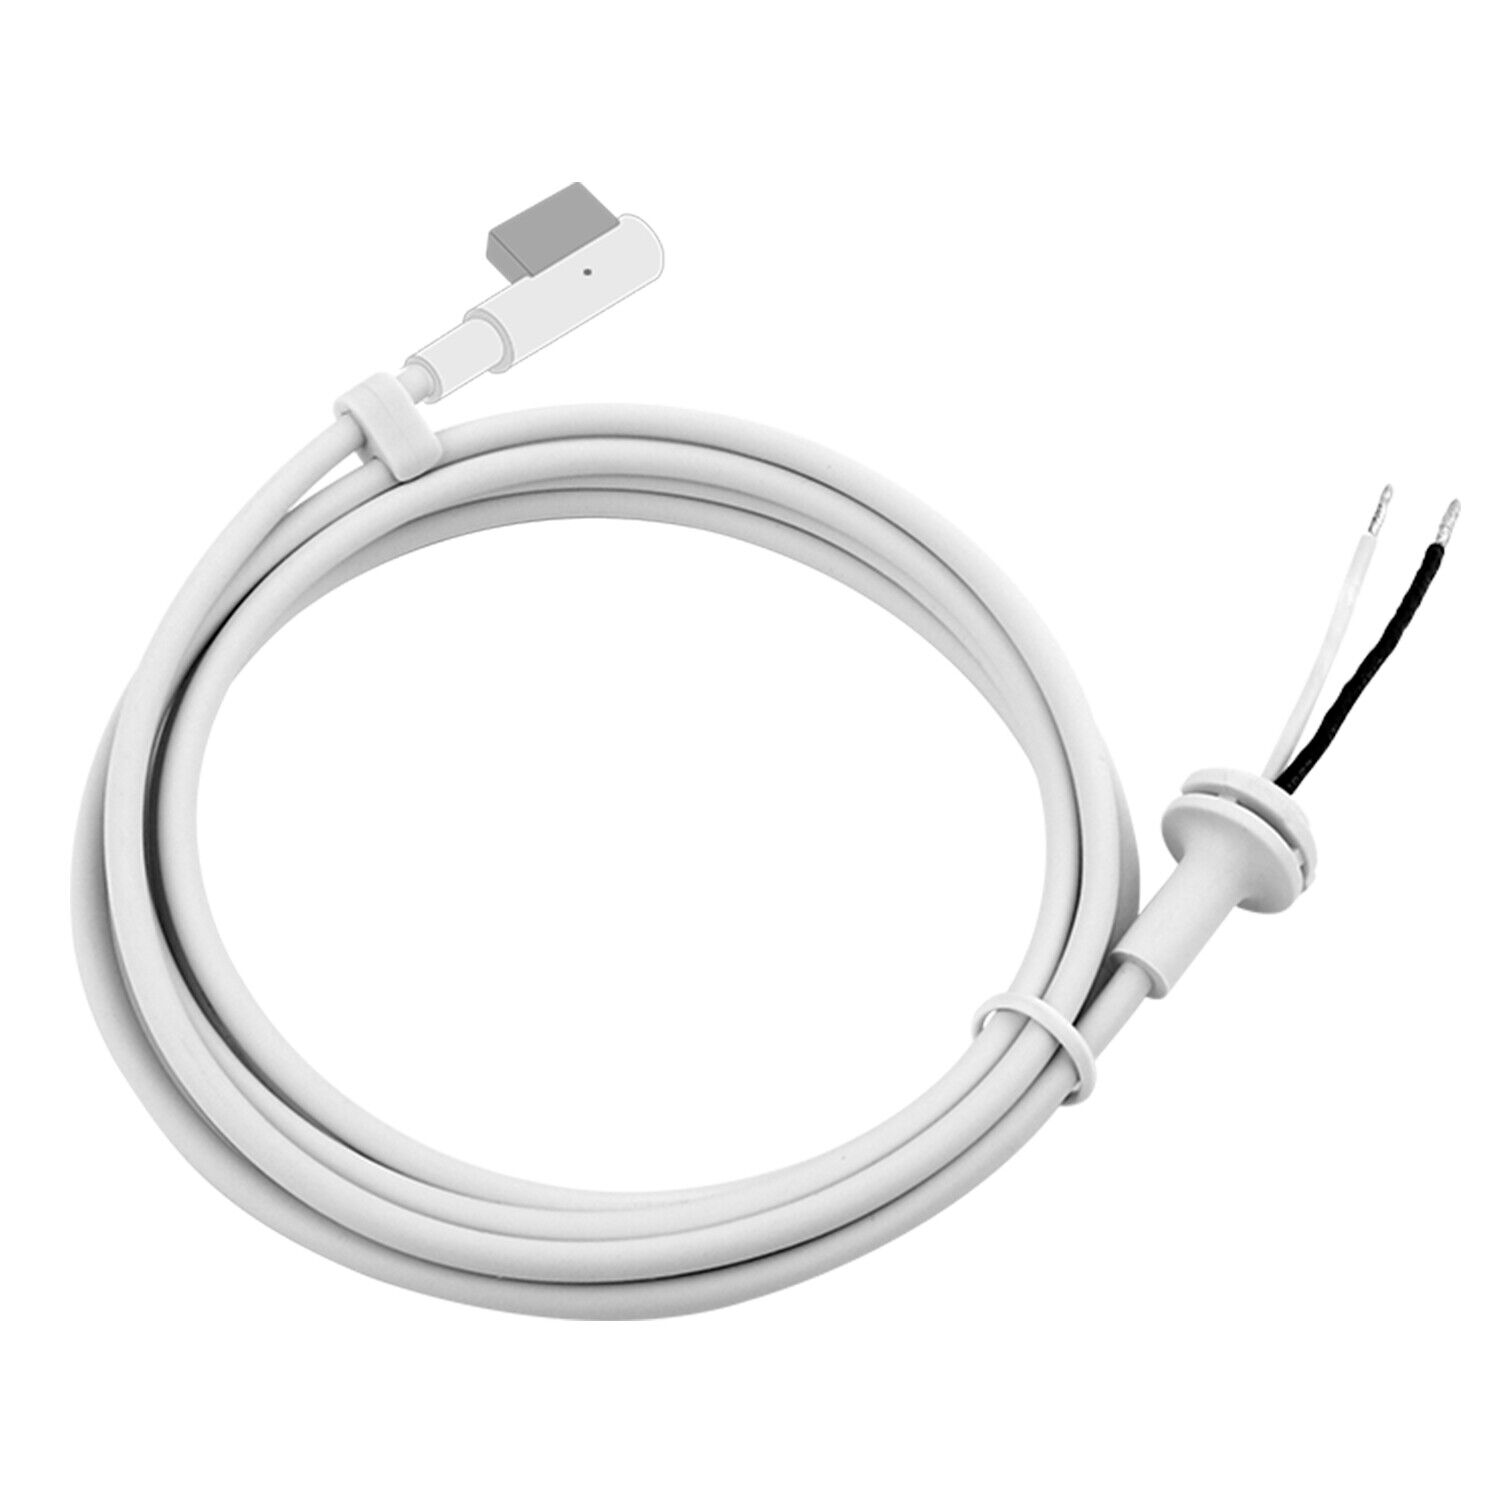 apple-magsafe-charger-cable for macbook 2008 2009 2010 Macbok Pro 2011 2012